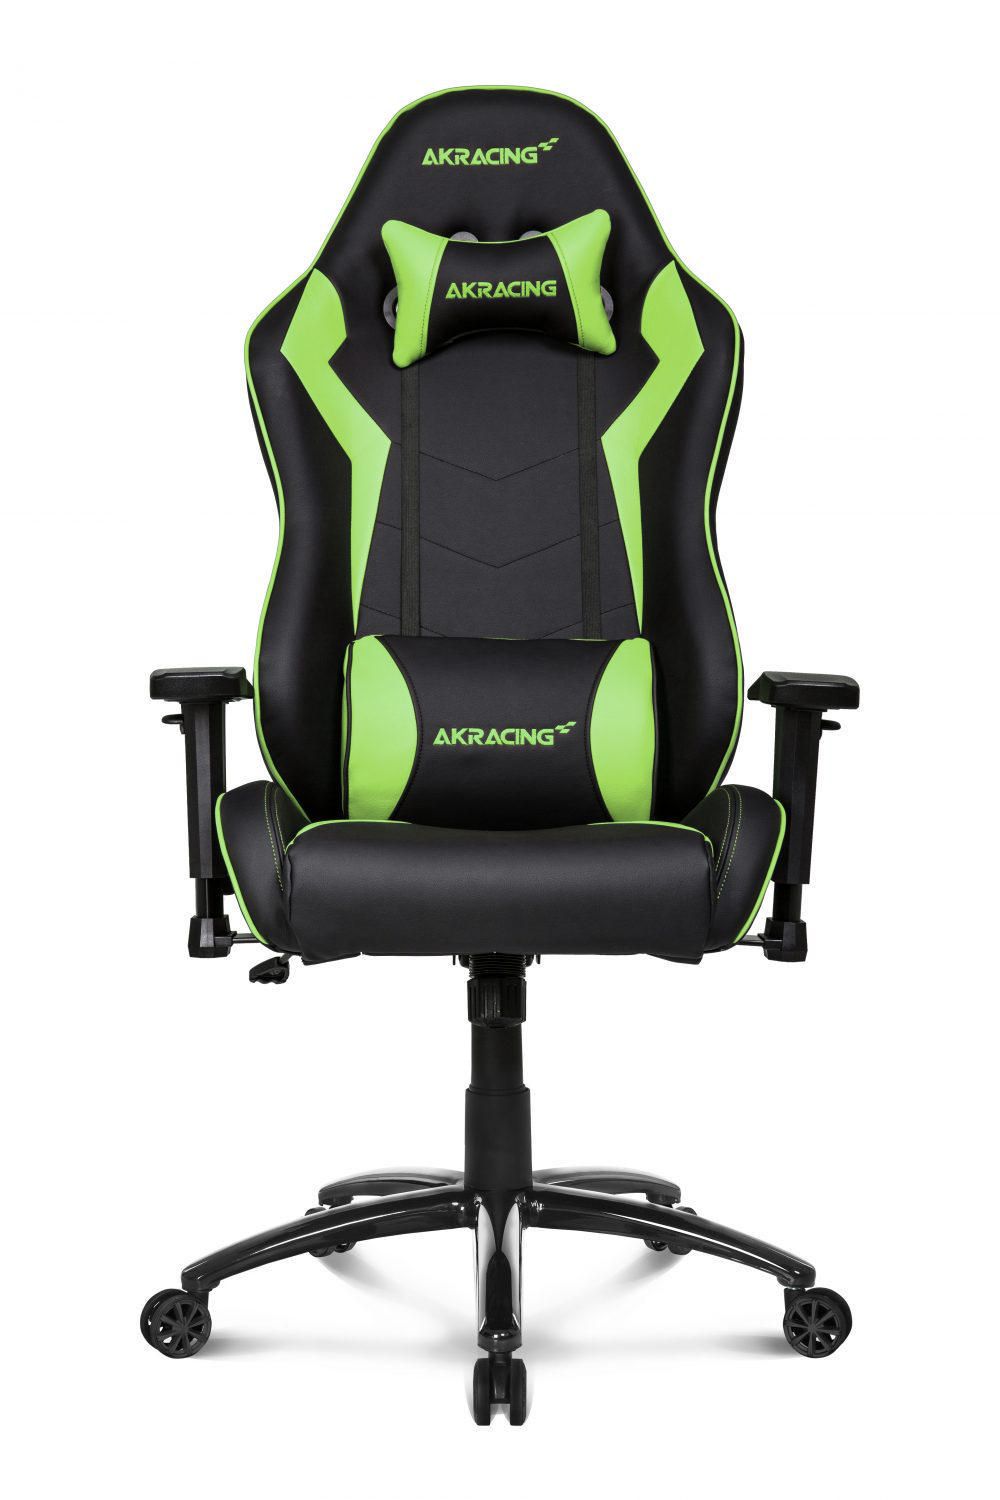 New Black Friday Gaming Chair Canada for Large Space